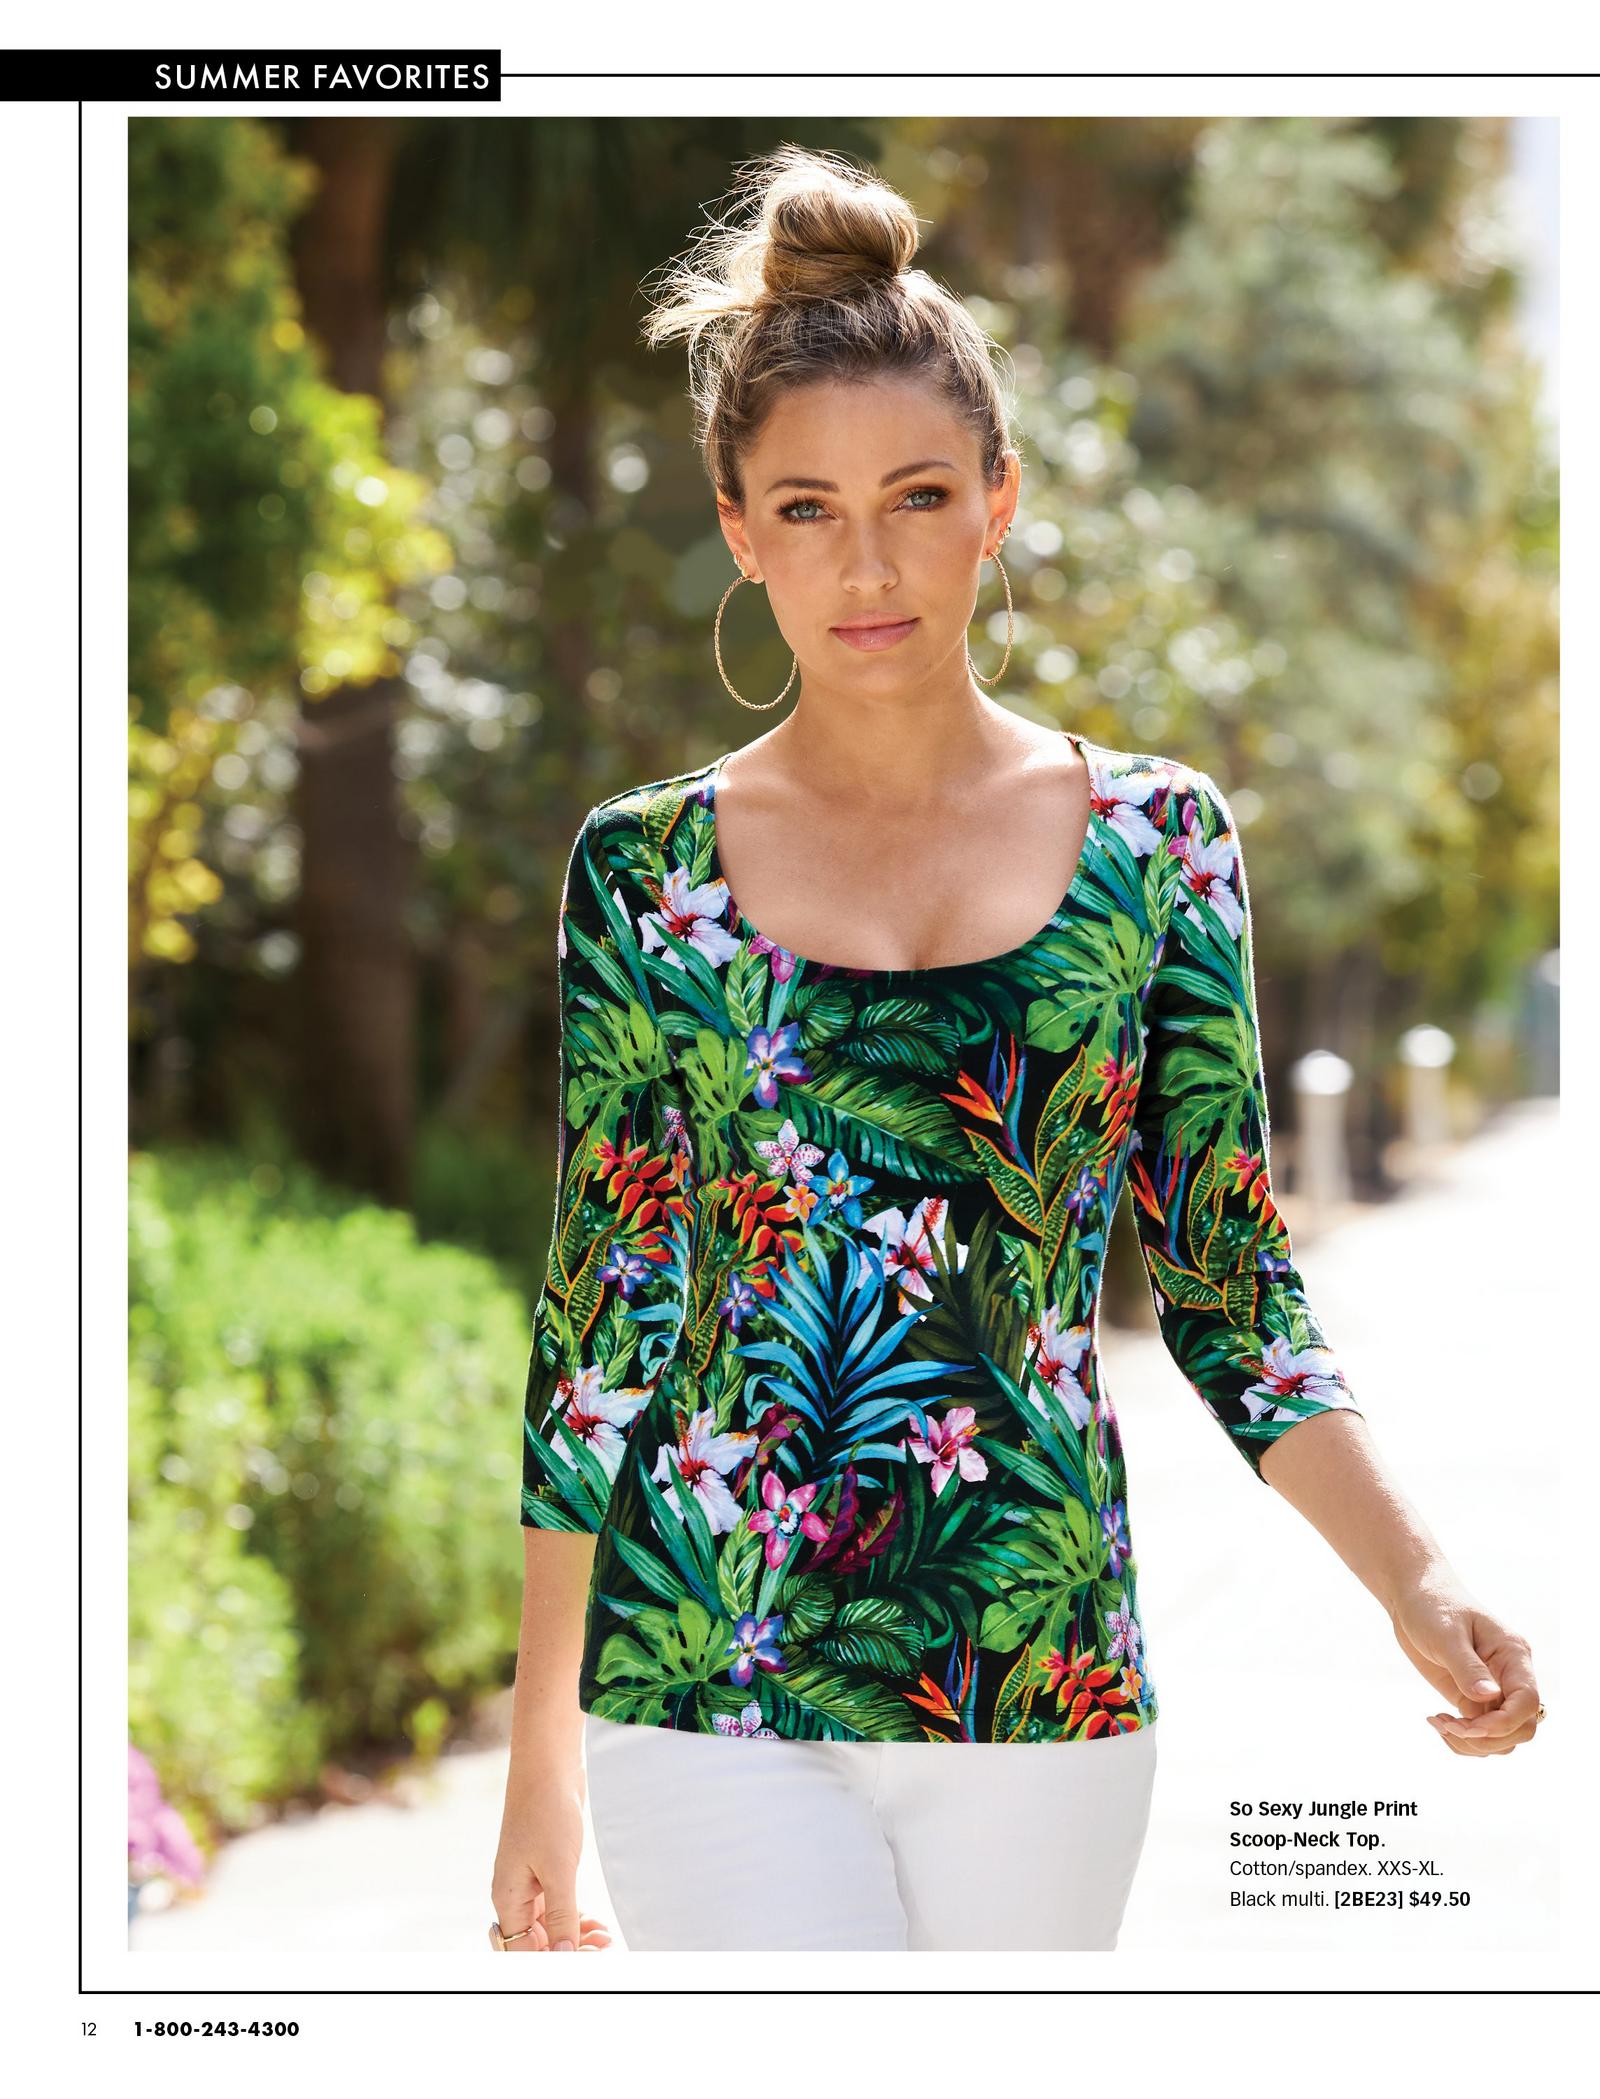 model wearing a tropical jungle print three-quarter sleeve scoop neck top and white jeans.